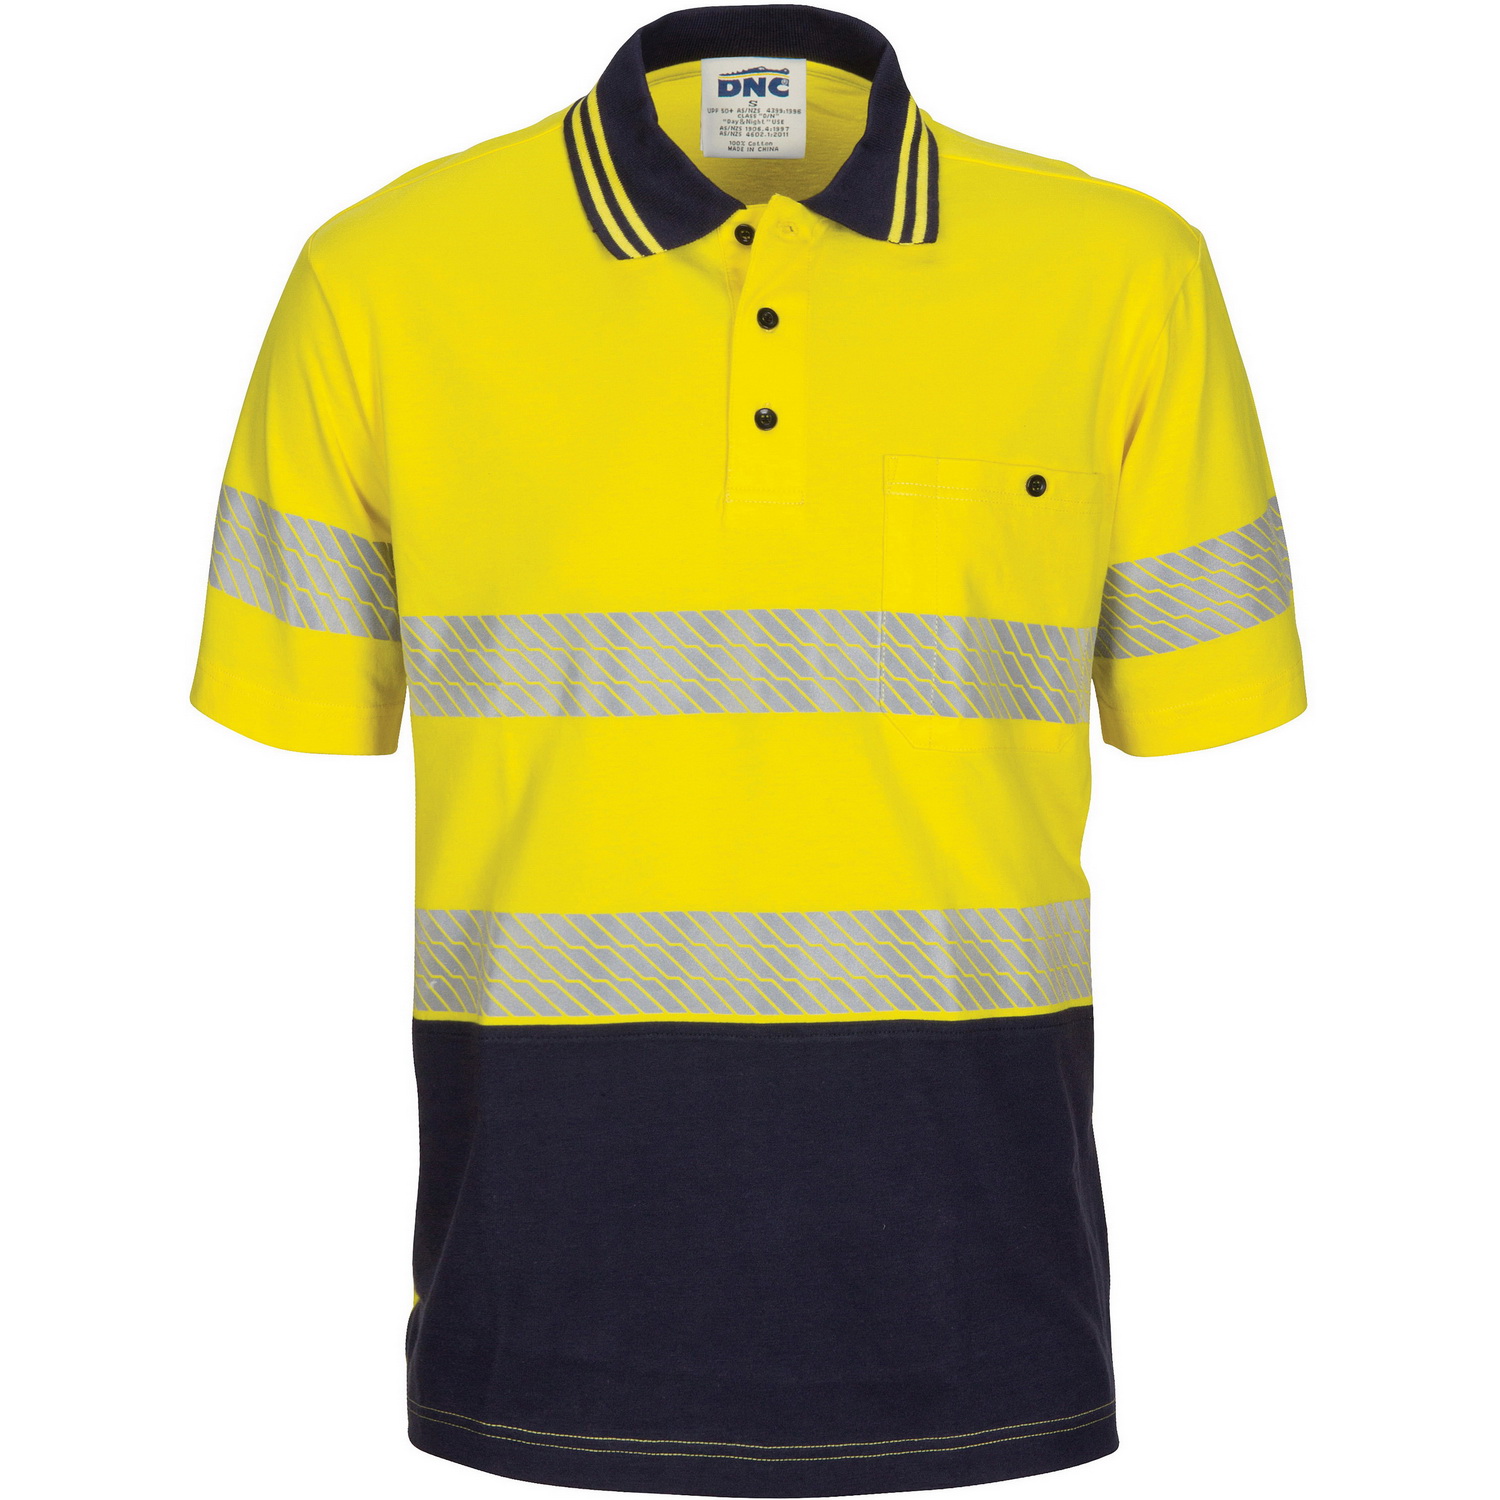 HIVIS Segment Taped Cotton Jersey Polo - Short Sleeve